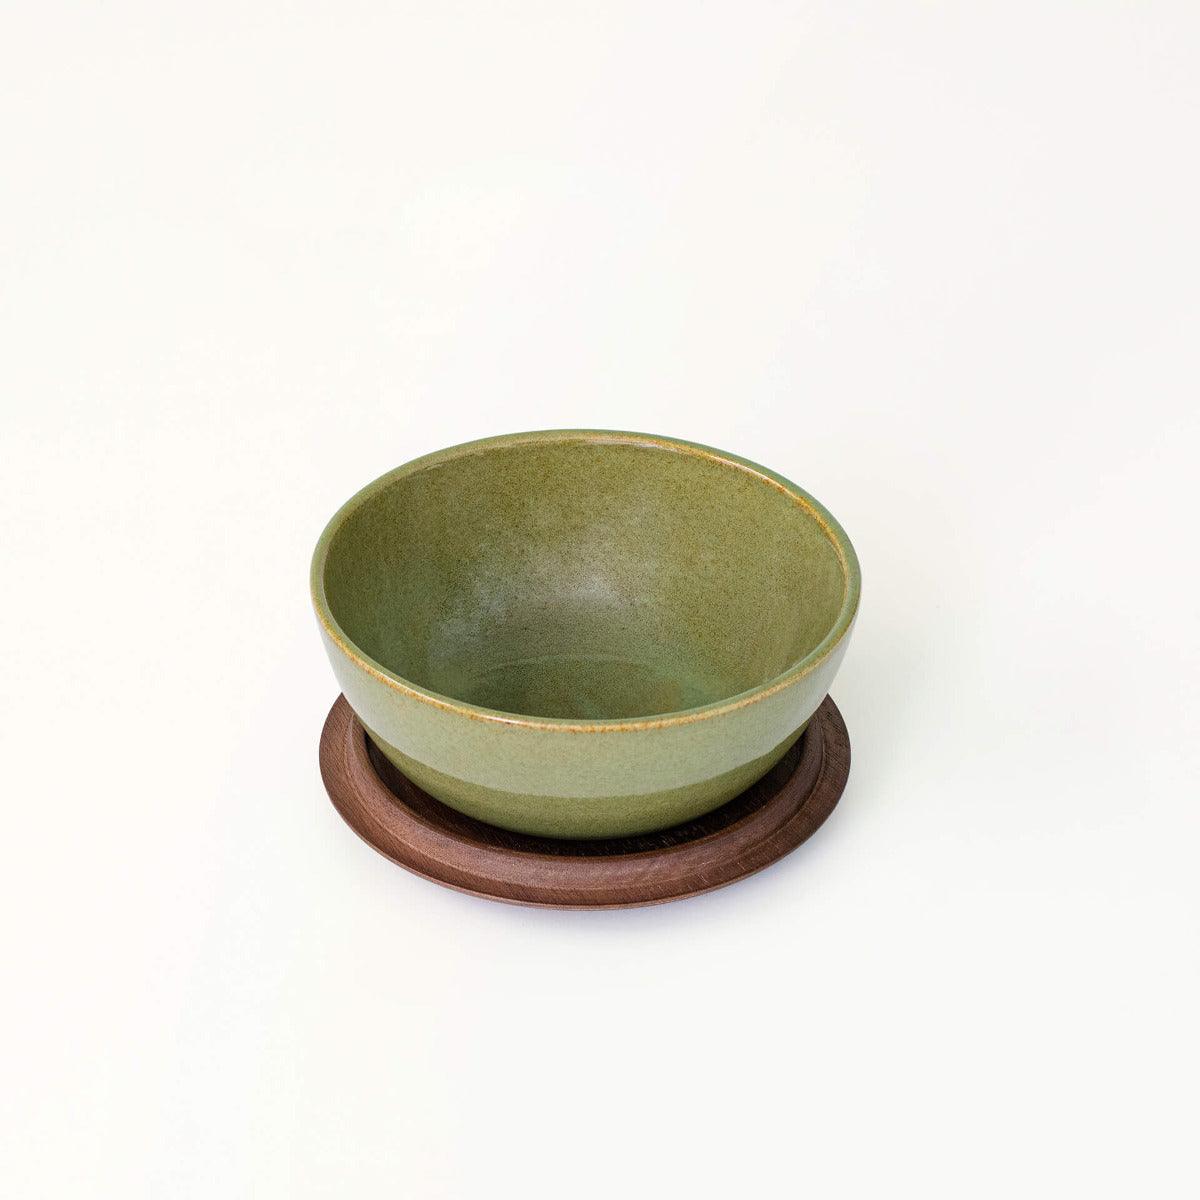 Rustic Sage Ceramic Soup Bowl with Wooden Lid